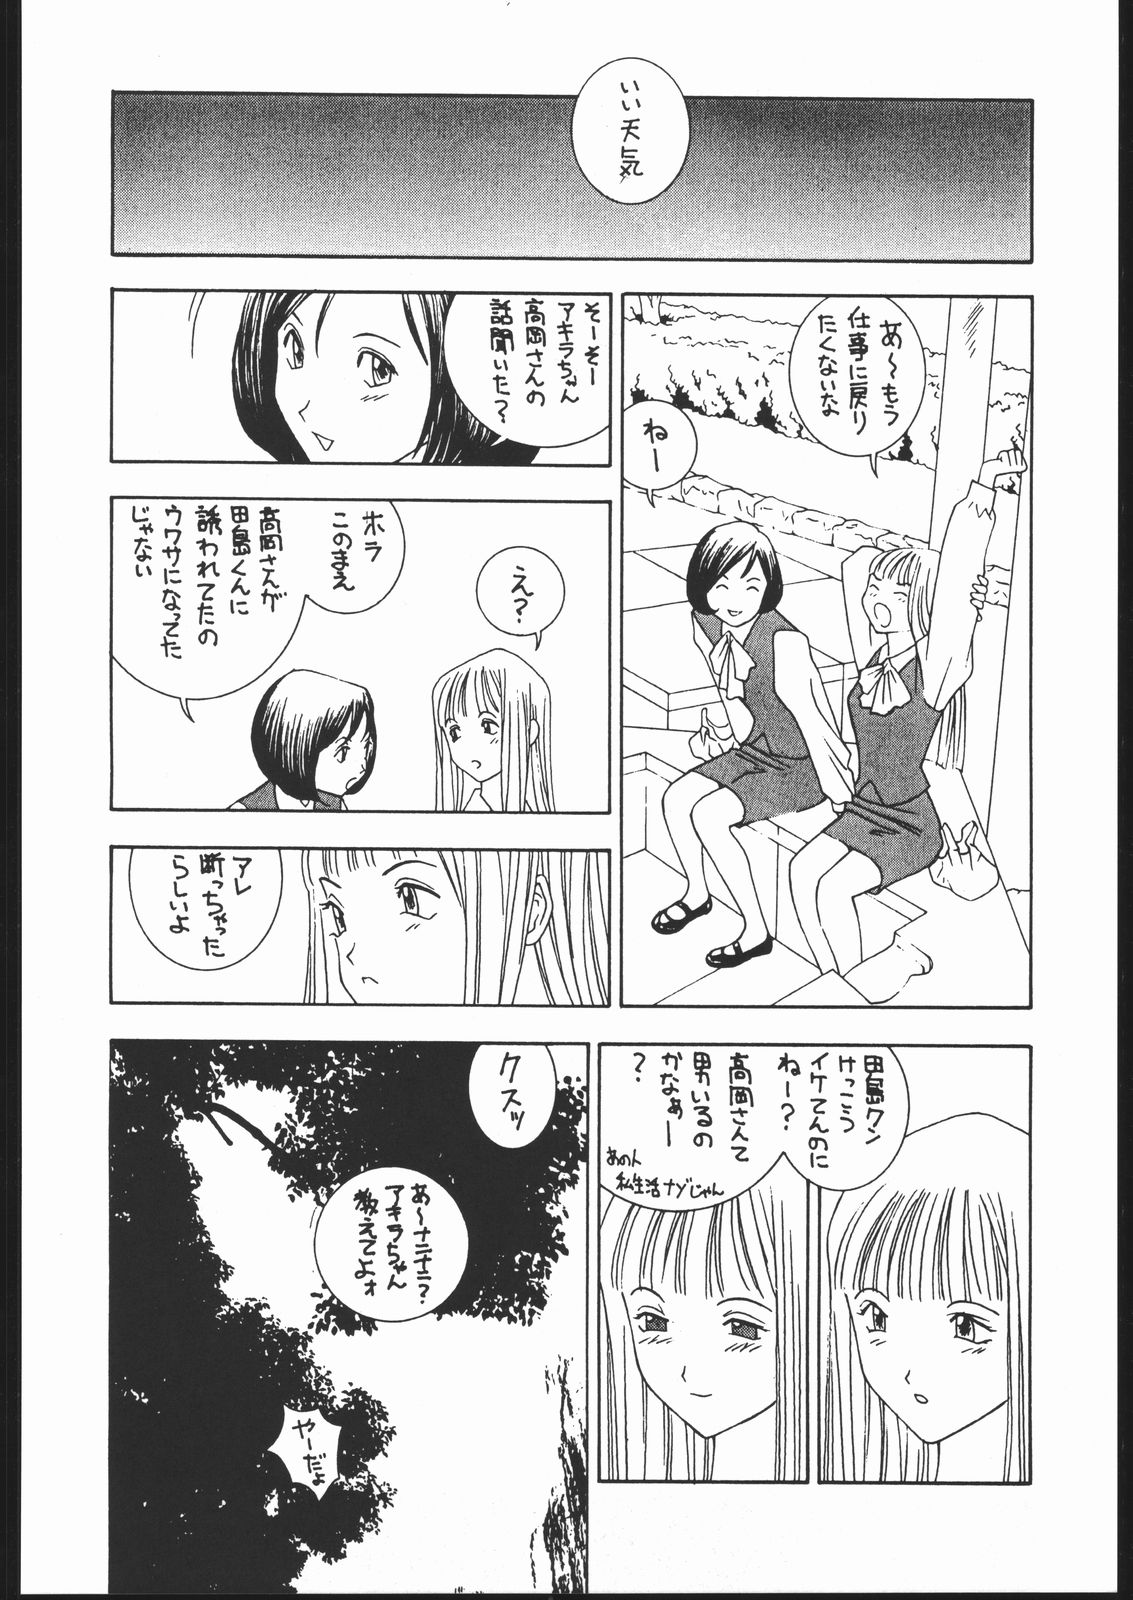 [PINK CAT'S GARDEN] SEXCEED ver.8.0 page 35 full